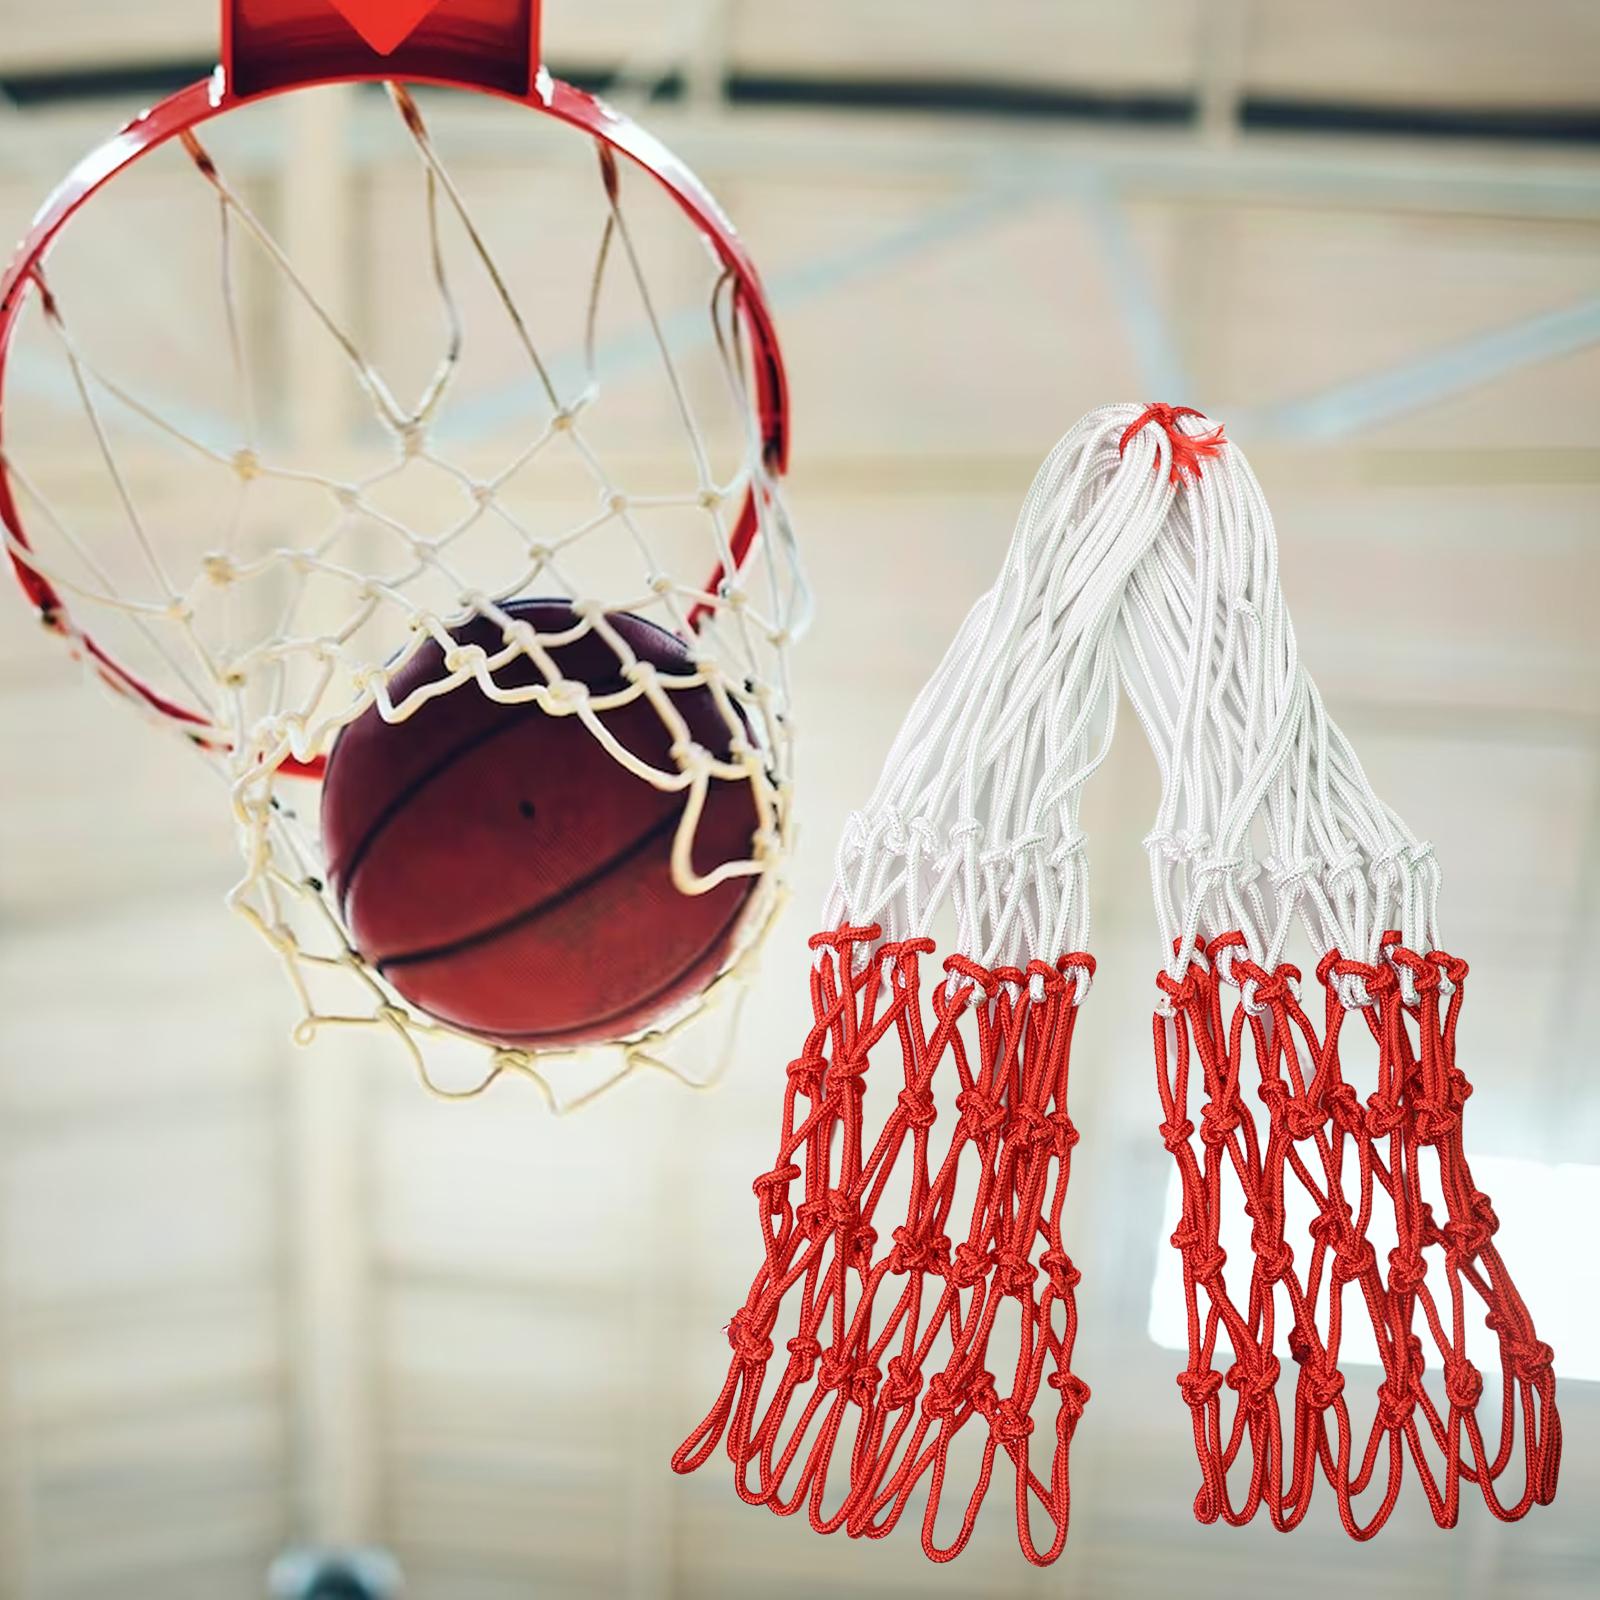 Basketball Net Replacement Outdoor Professional for Basketball Hoops White of Red